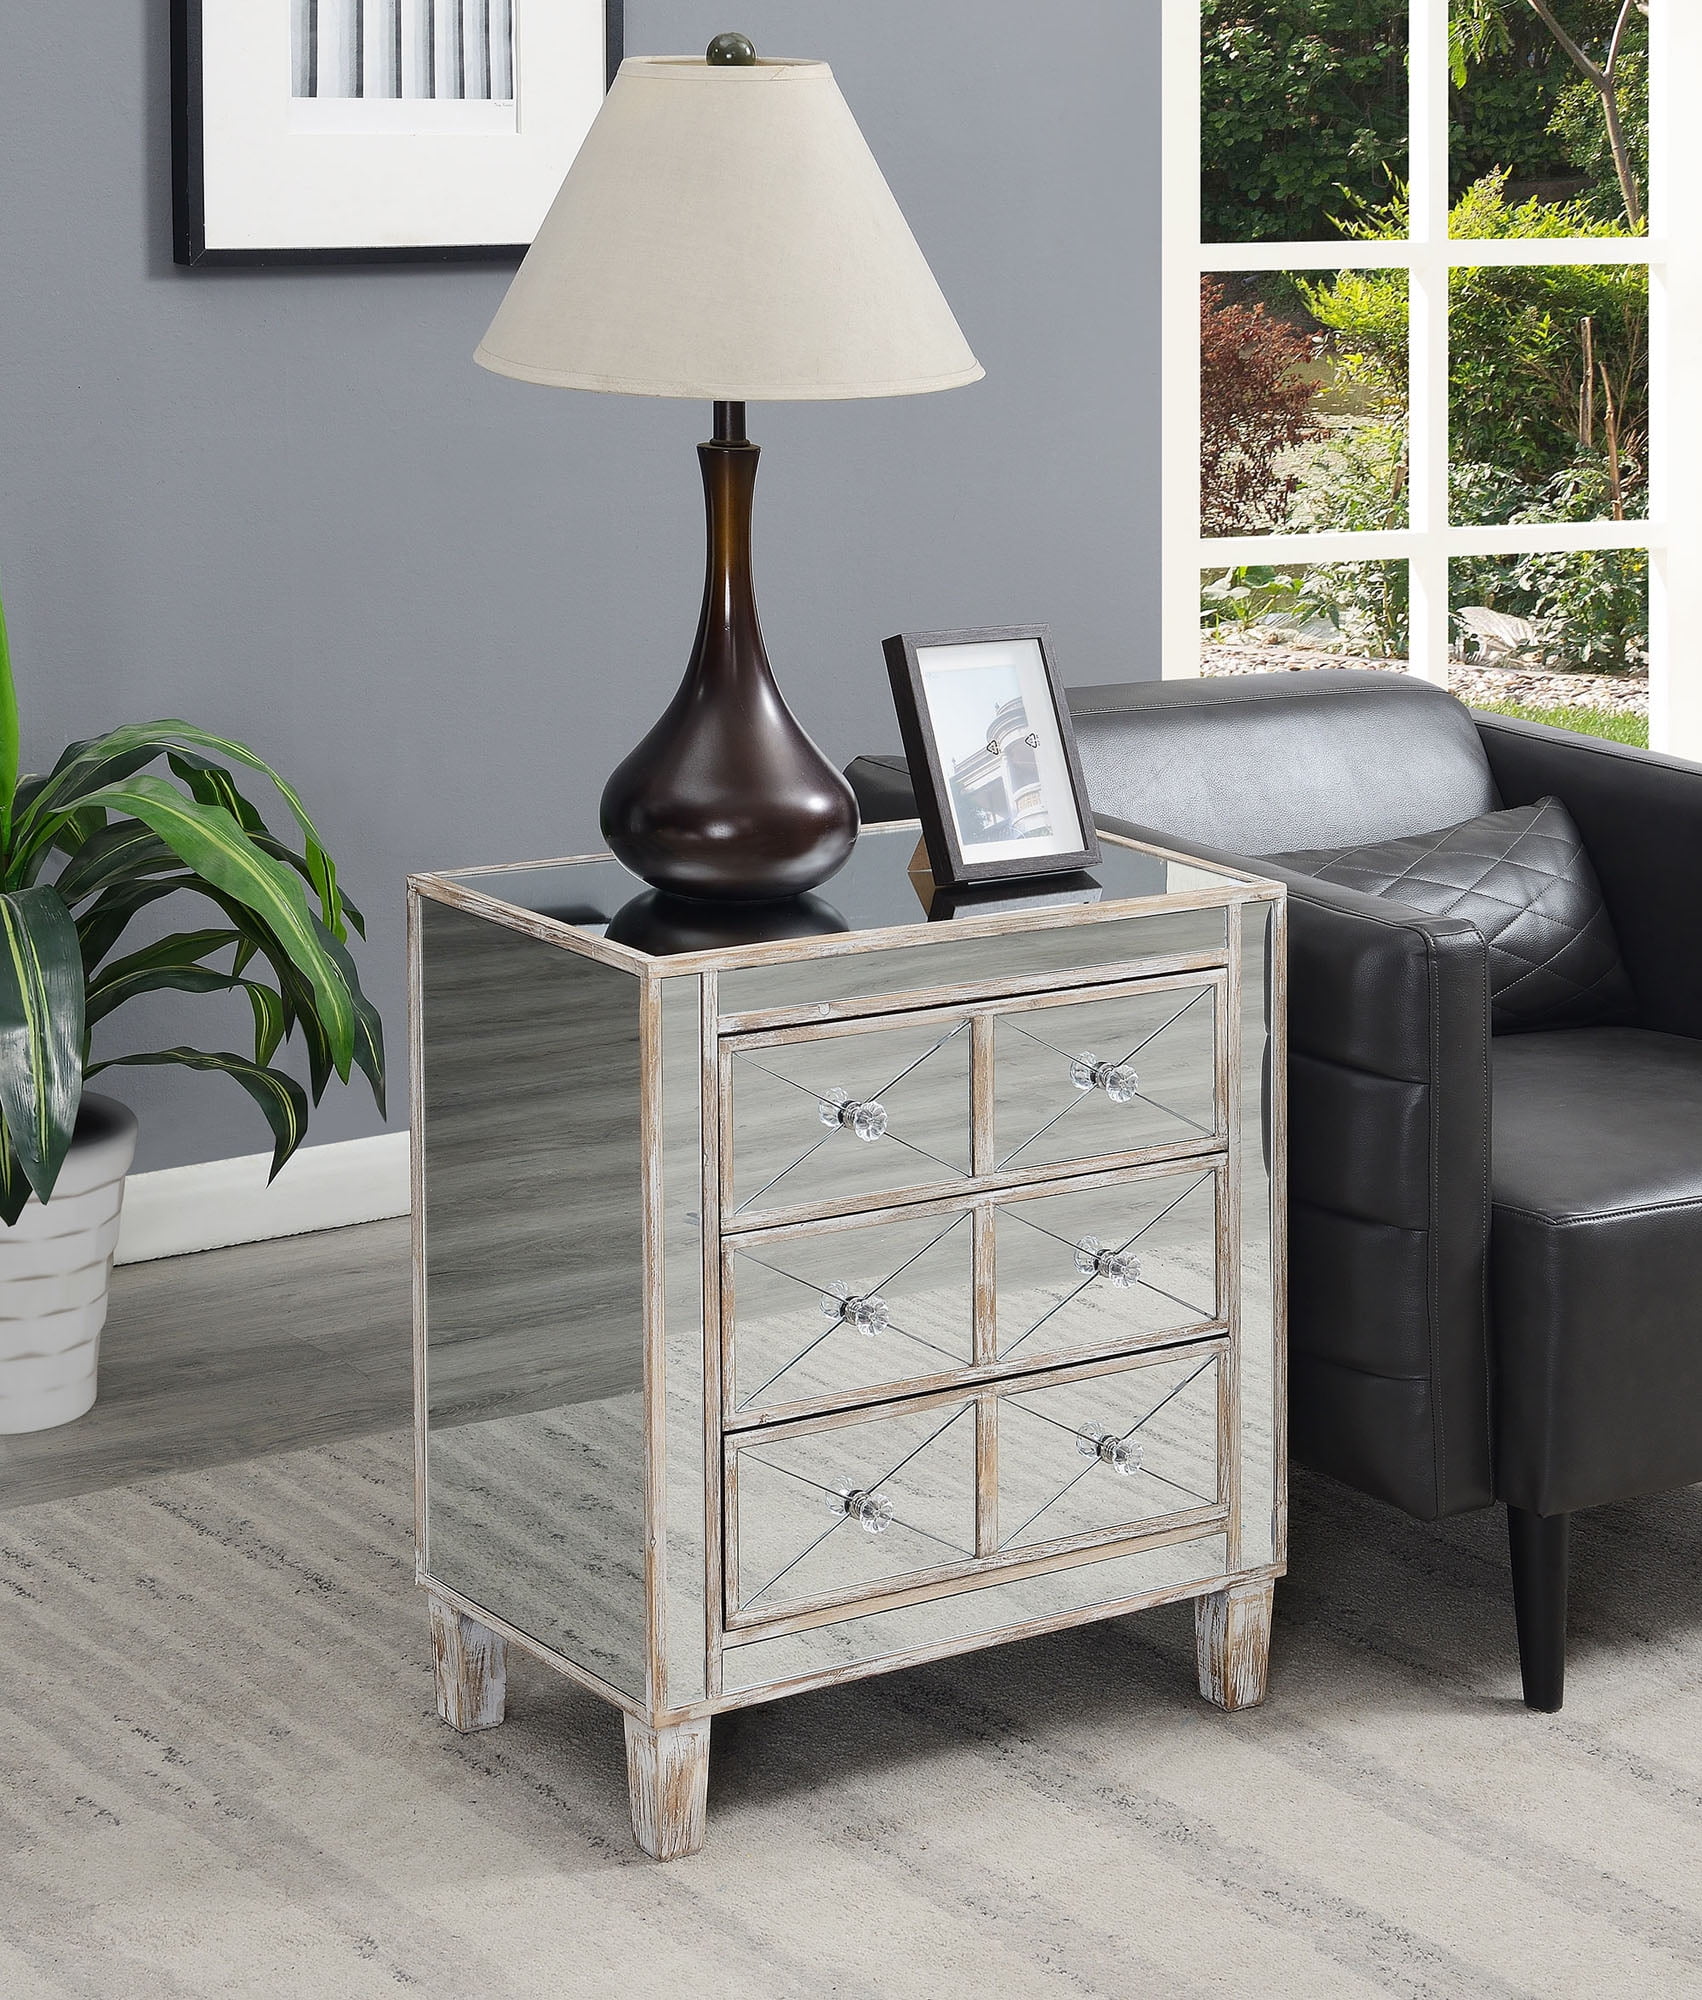 Chelsea Lane Mirror End Table With, Chelsea Lane Mirror End Table With Drawer Chrome